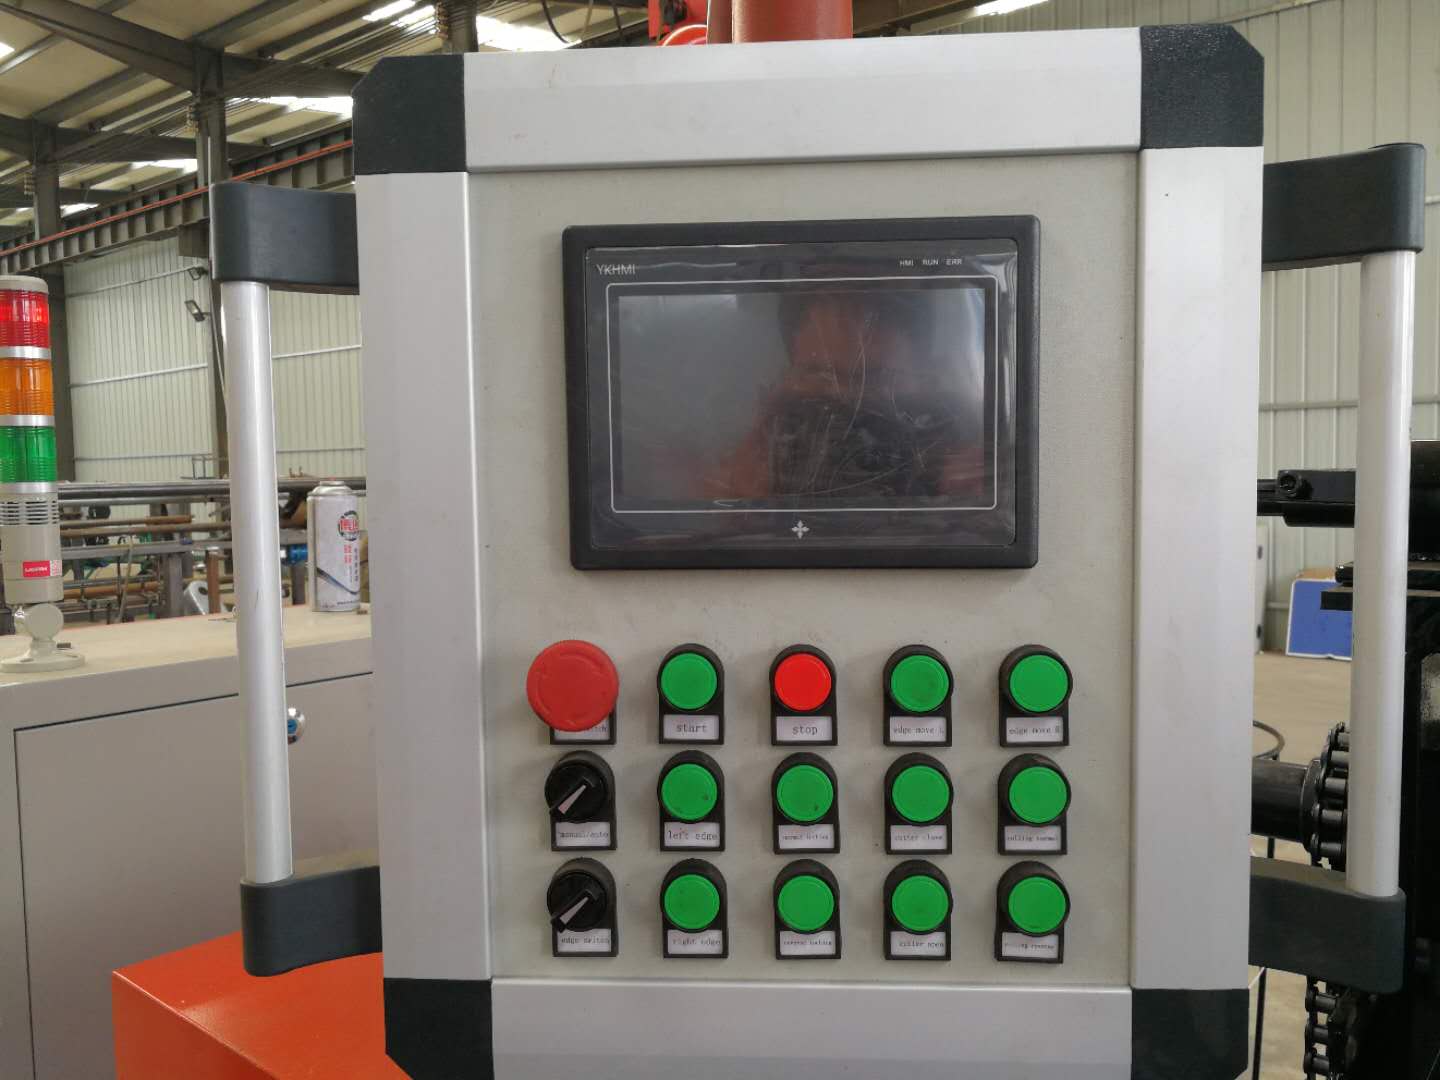 automatic reinforcing mesh welding machine